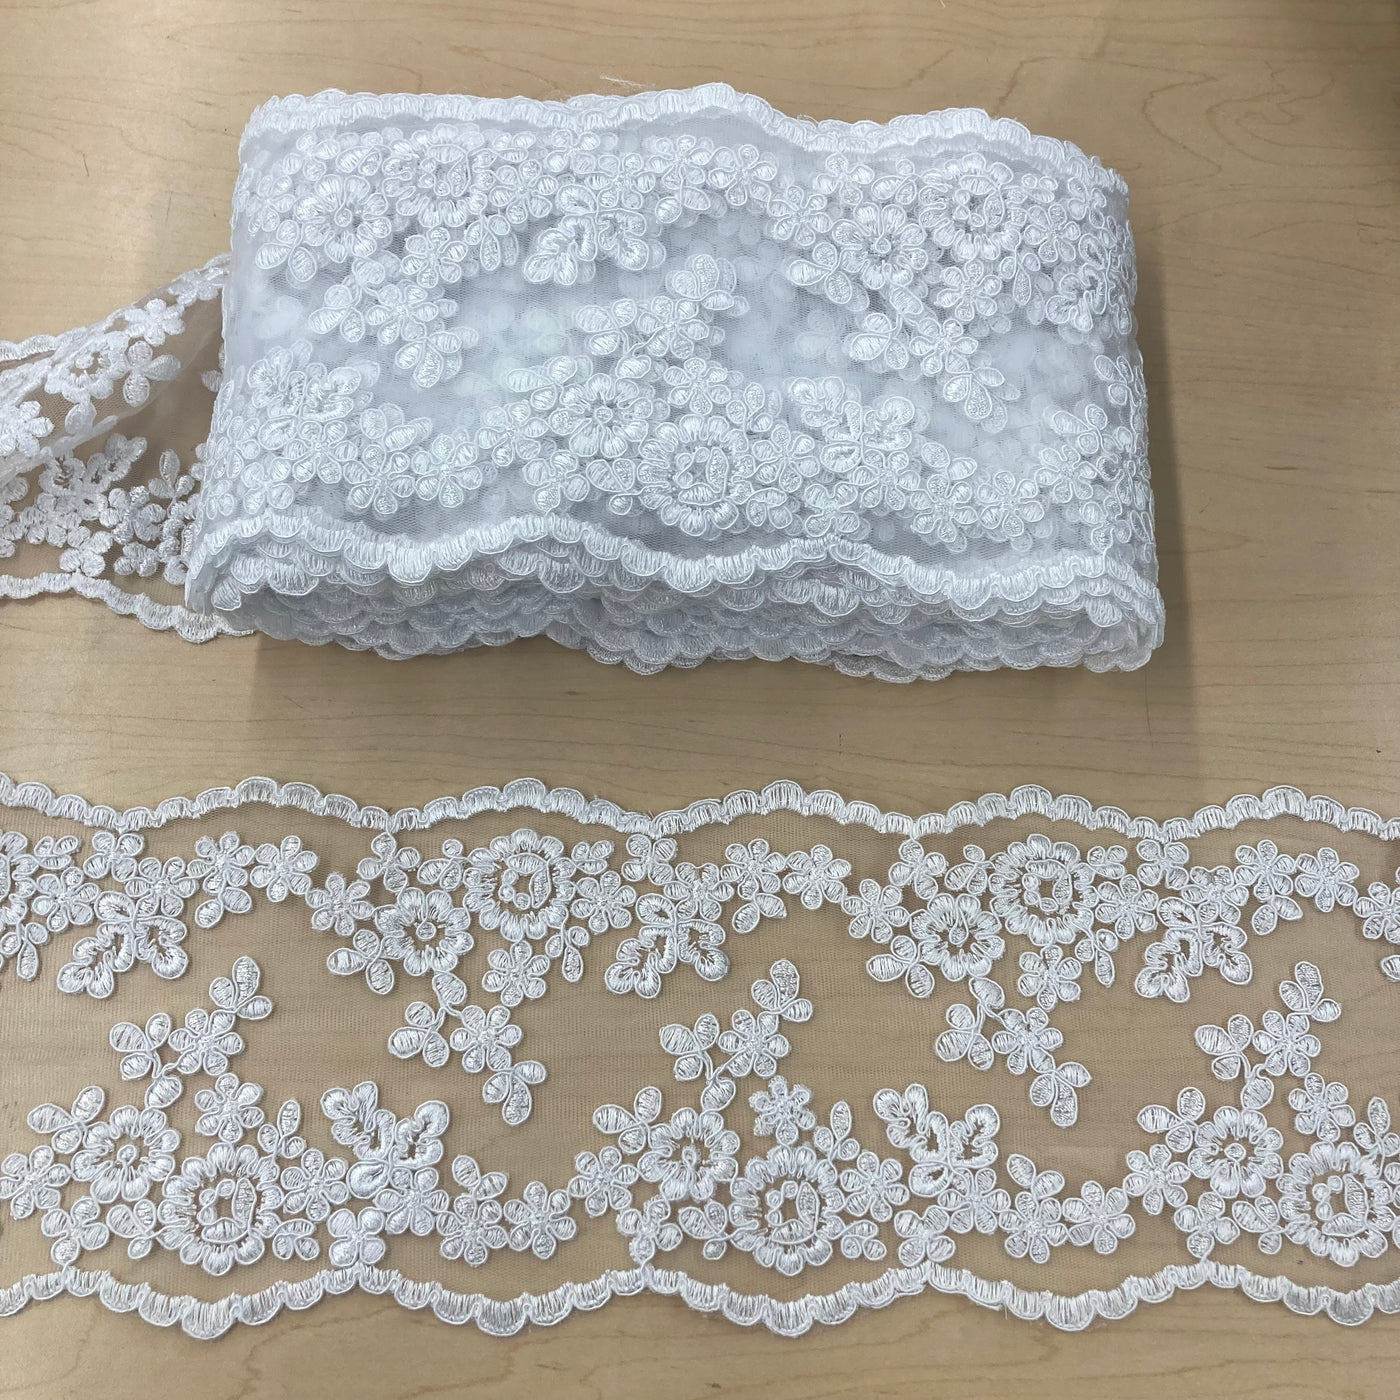 Corded & Embroidered Double Sided Trimming on White Mesh Net Lace. Lace Usa